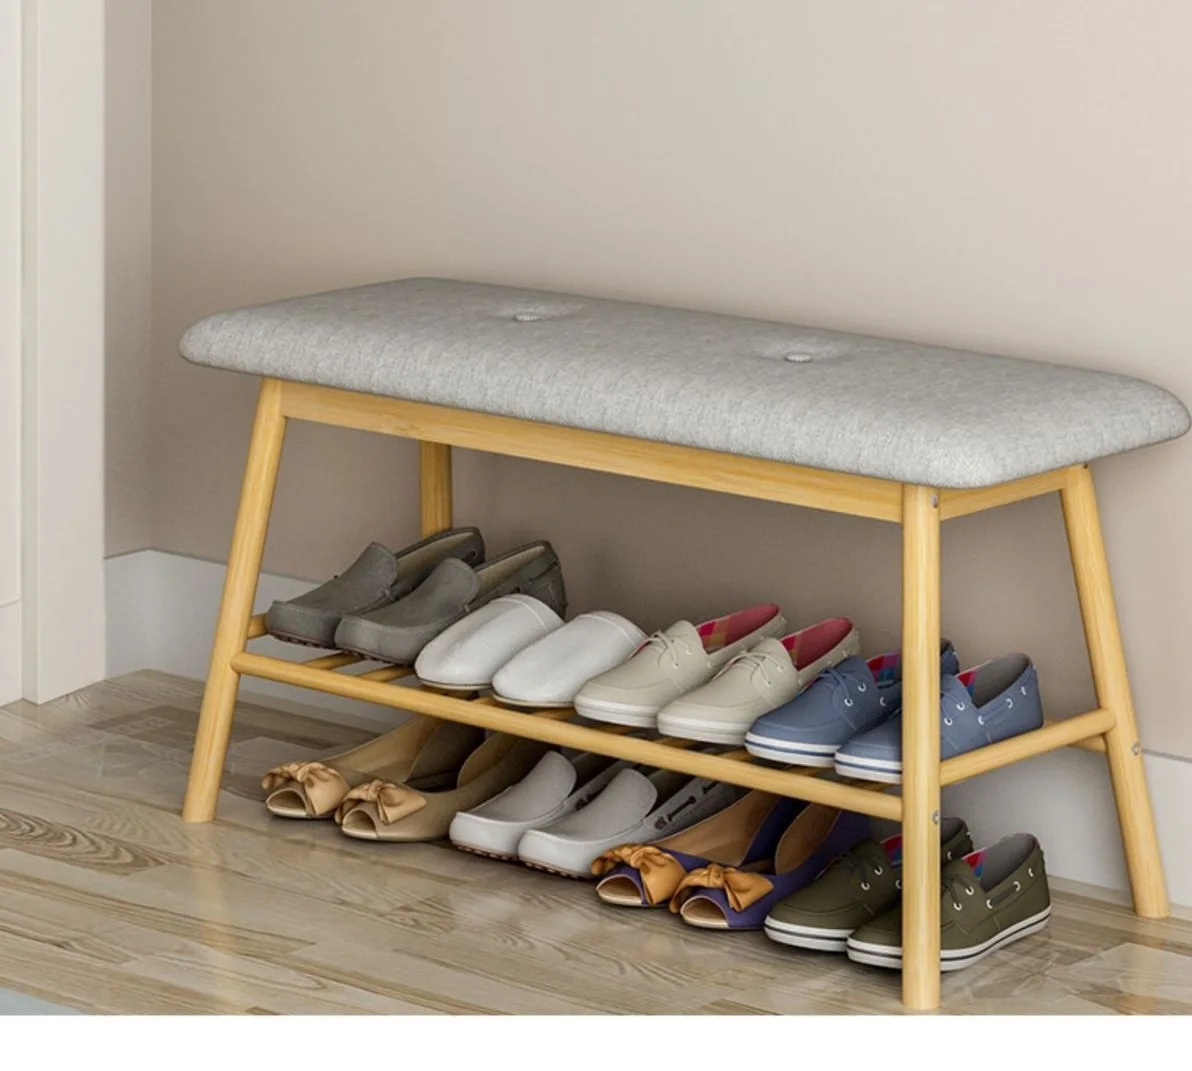 JOYLIVE Living Room Furniture Home Solid Wood Foot Stool Bench Simple Modern Storage Creative Fabric Bamboo Multilayer Shoe Rack